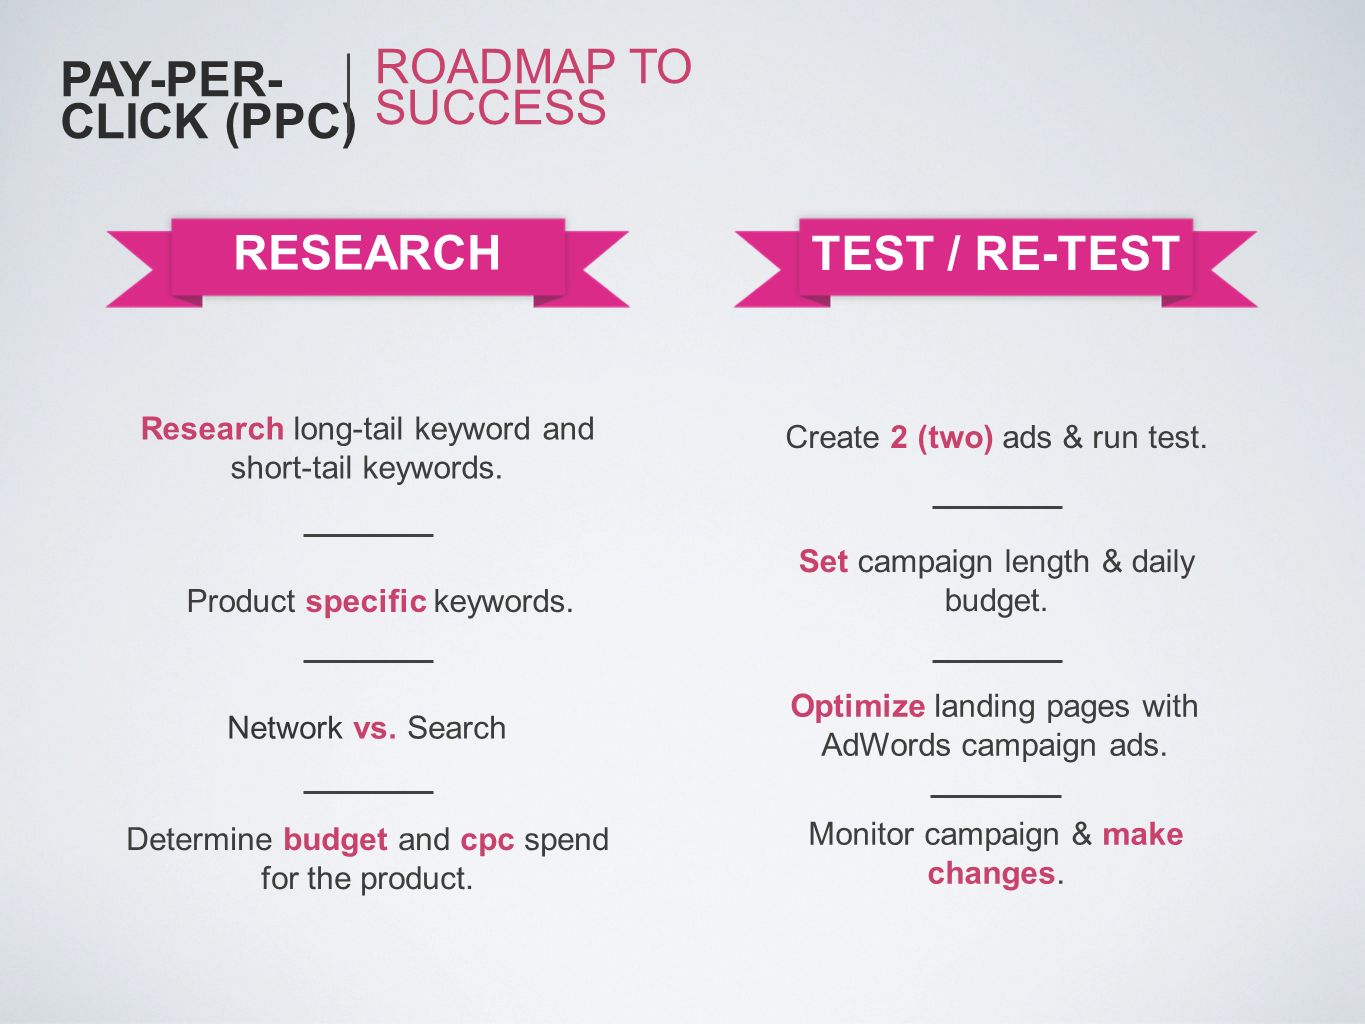 PAY-PER-CLICK (PPC) ROADMAP TO SUCCESS RESEARCH TEST / RE-TEST